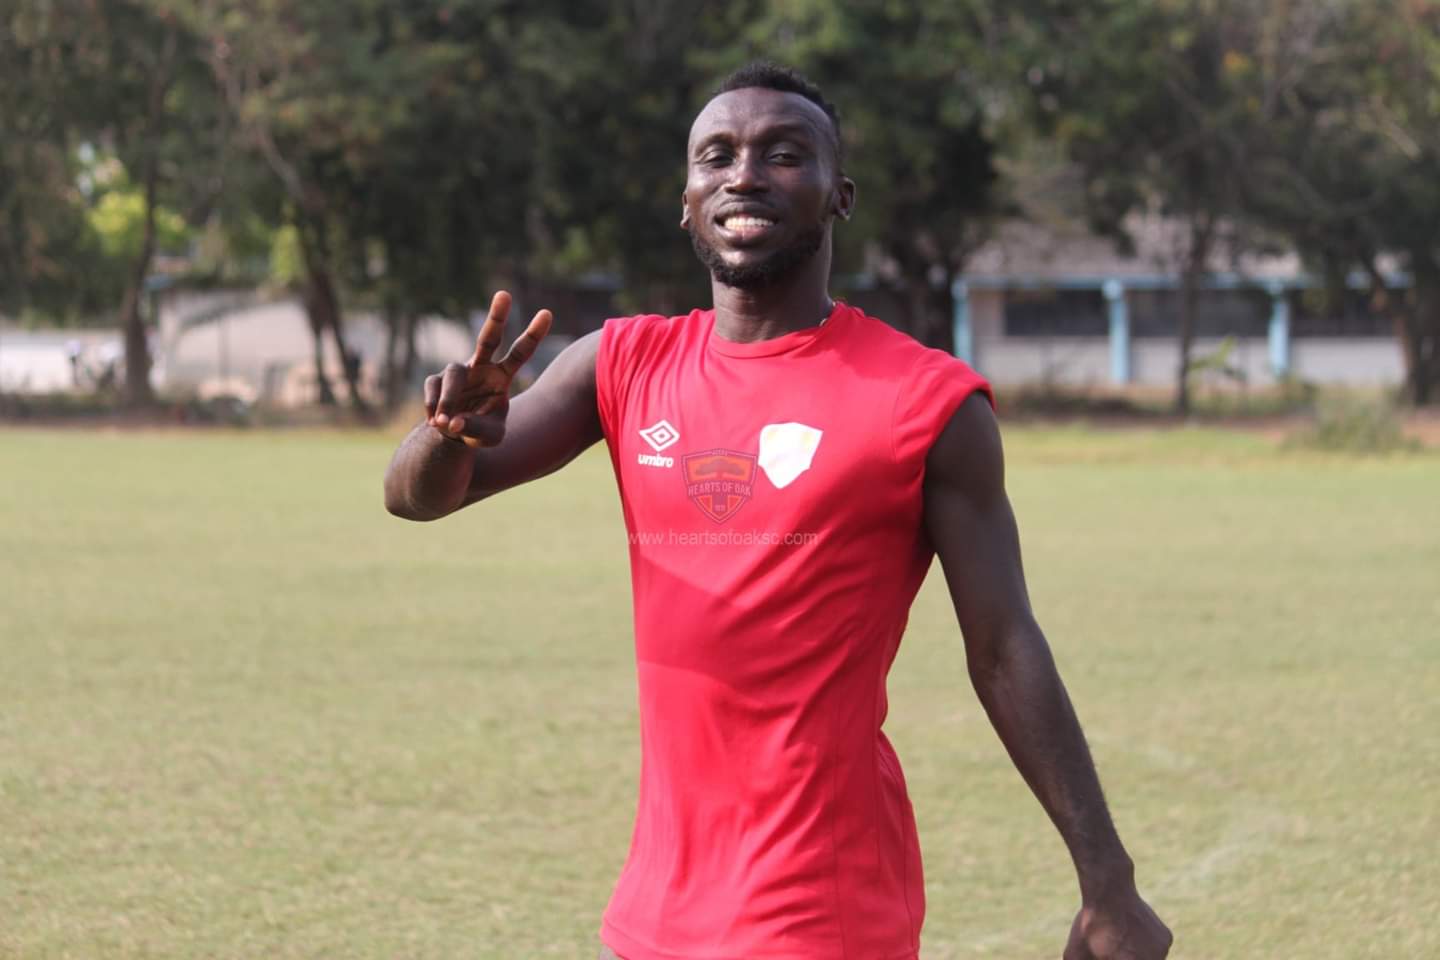 I will visit Hearts of Oak players at their training grounds to motivate them - Emmanuel Nettey